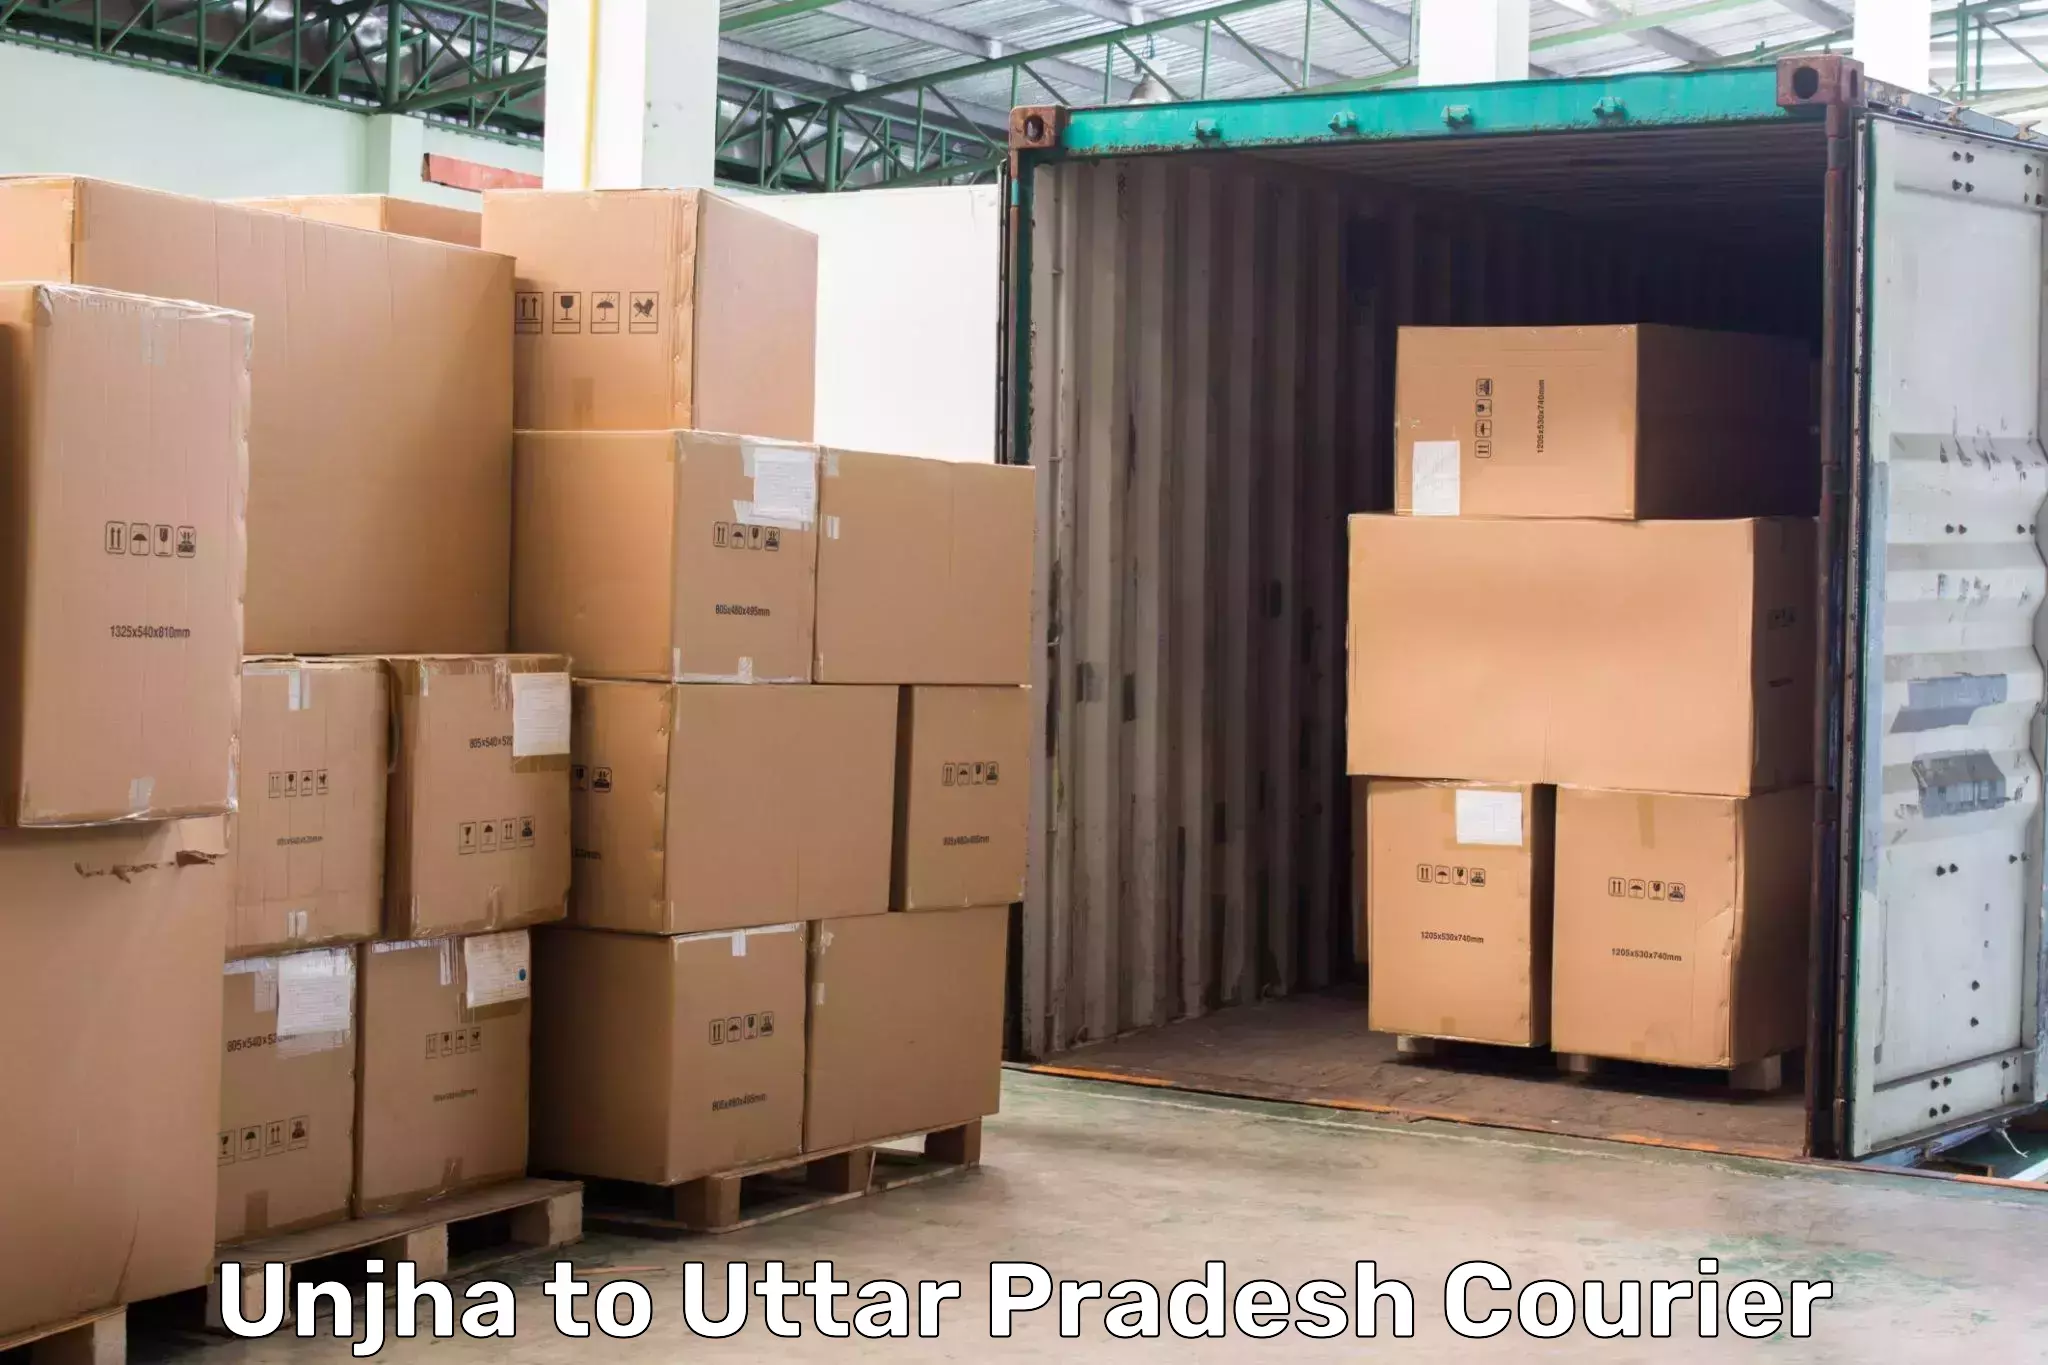 State-of-the-art courier technology Unjha to Uttar Pradesh